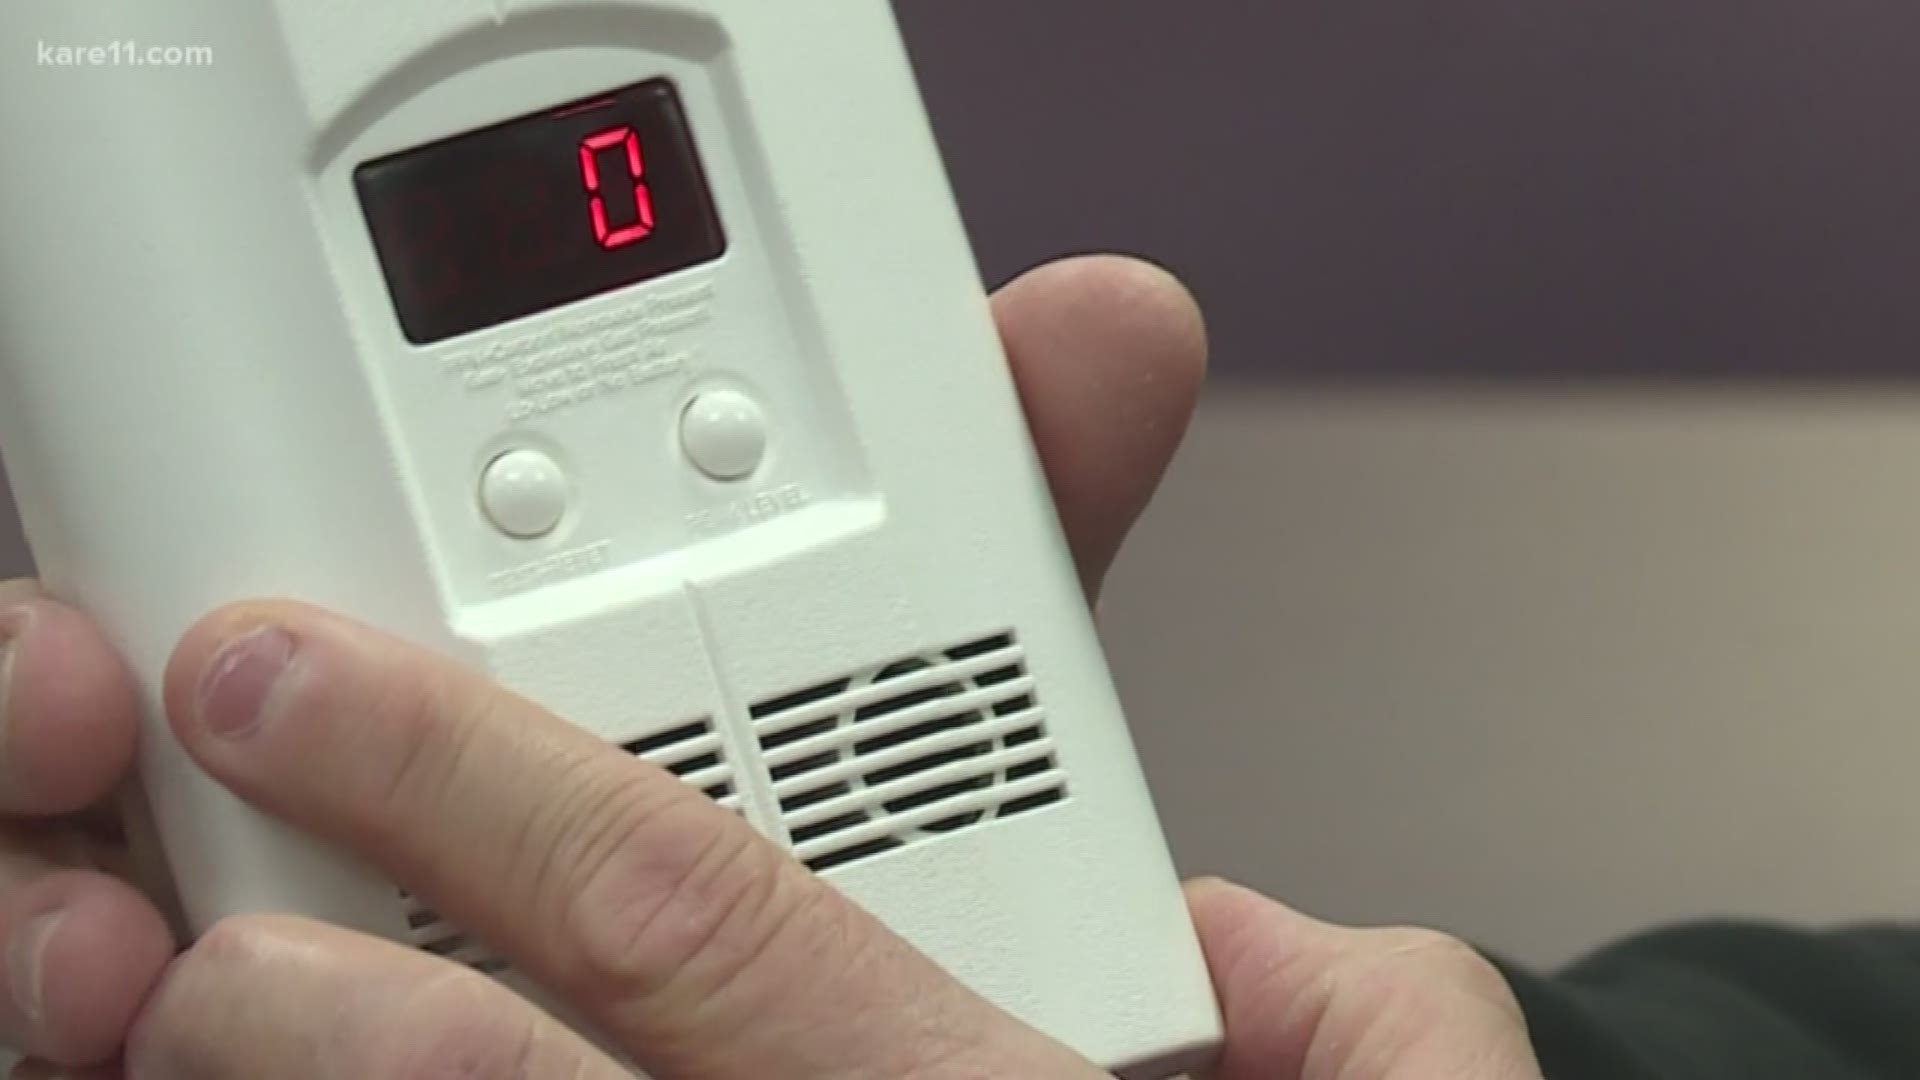 Make sure you're checking your carbon monoxide alarms now that the cold months are upon us.